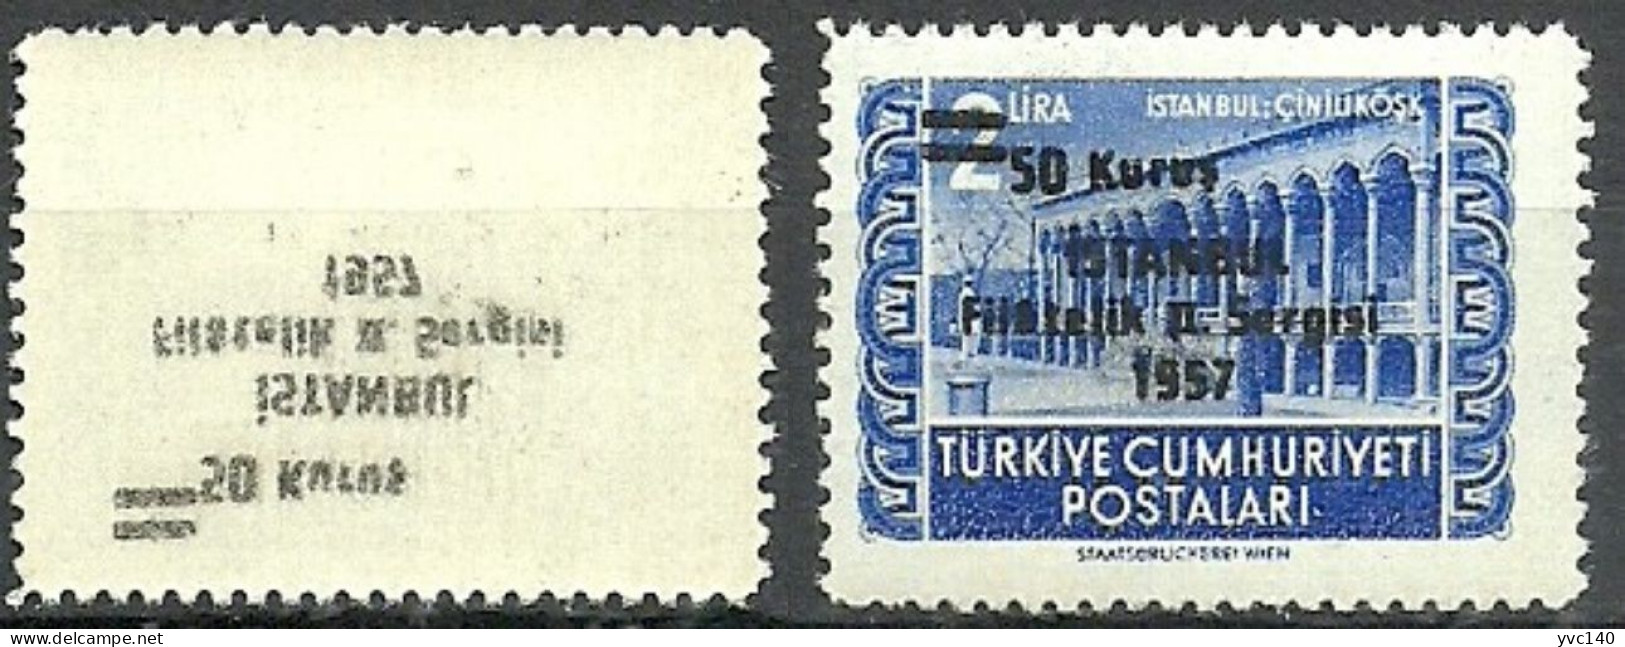 Turkey; 1957 Surcharged Commemorative Stamp For Istanbul Philately Exhibition ERROR "Abklatsch Surcharge" - Unused Stamps